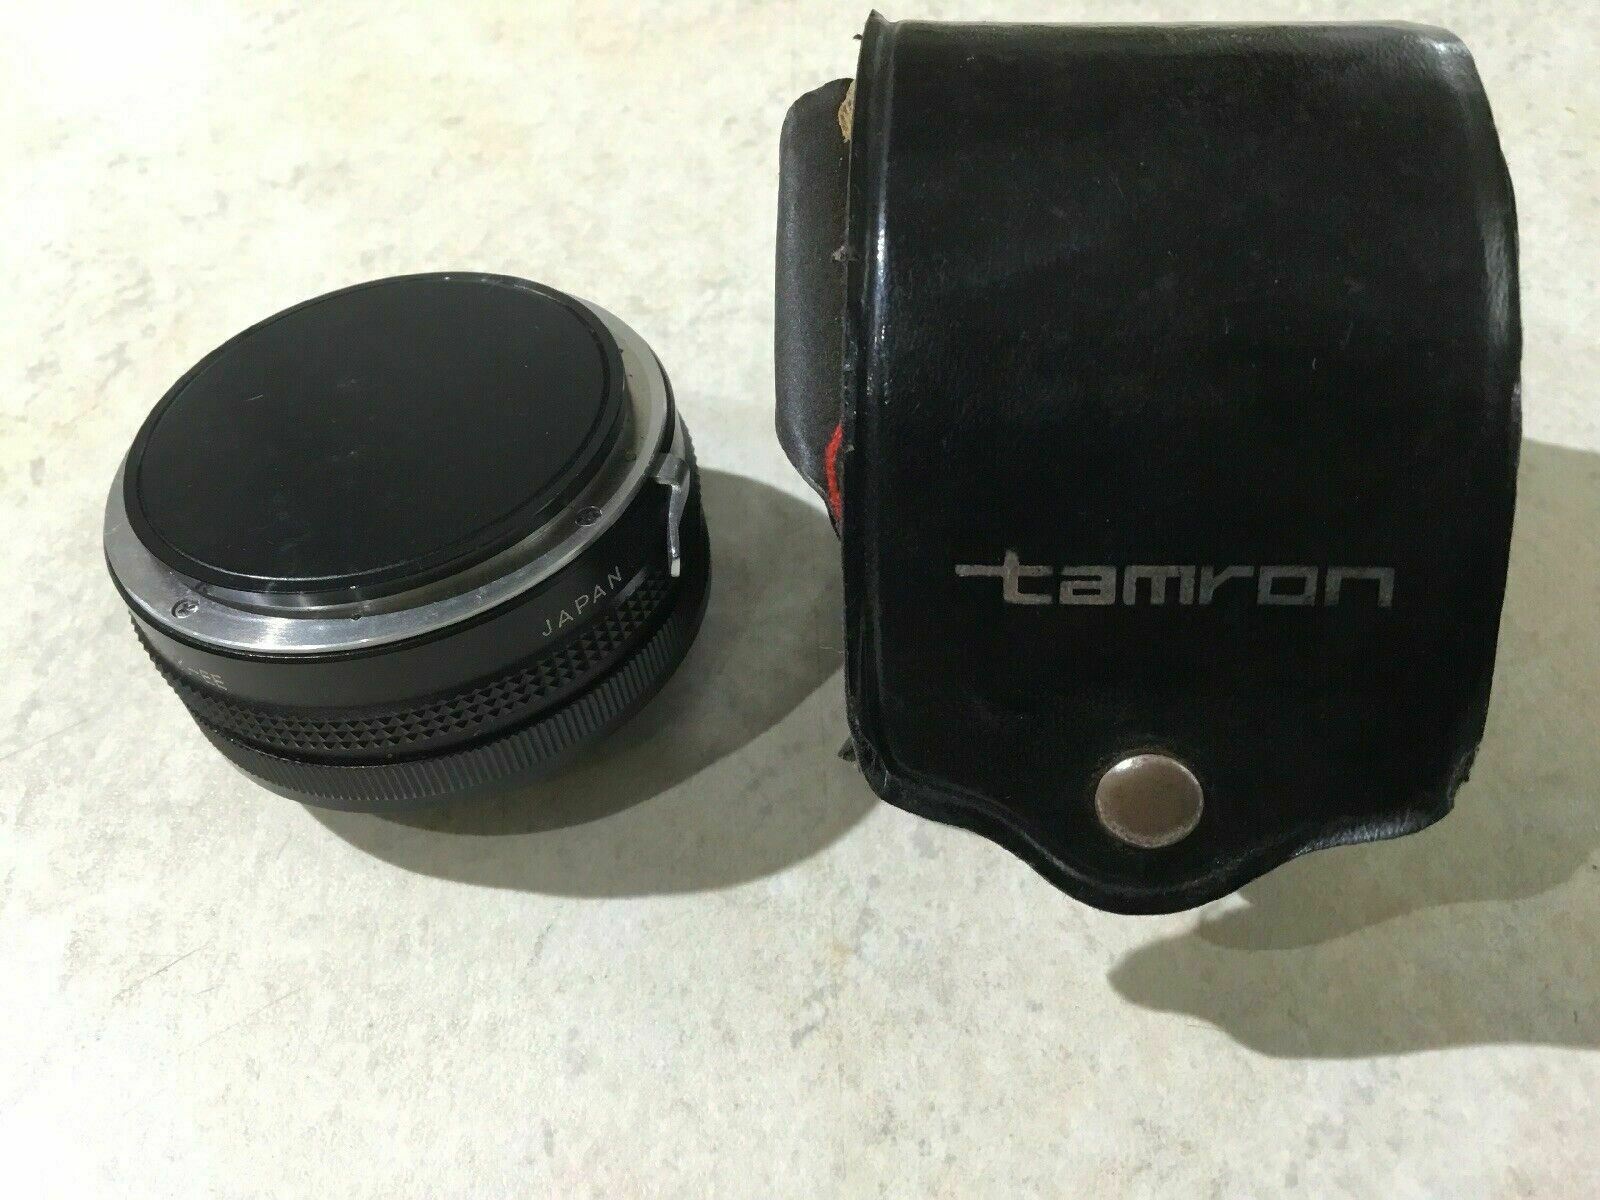 Tamron 2x Multi-Coated Auto Tele Converter--K-EE With Case--Excellent Condition - $39.97